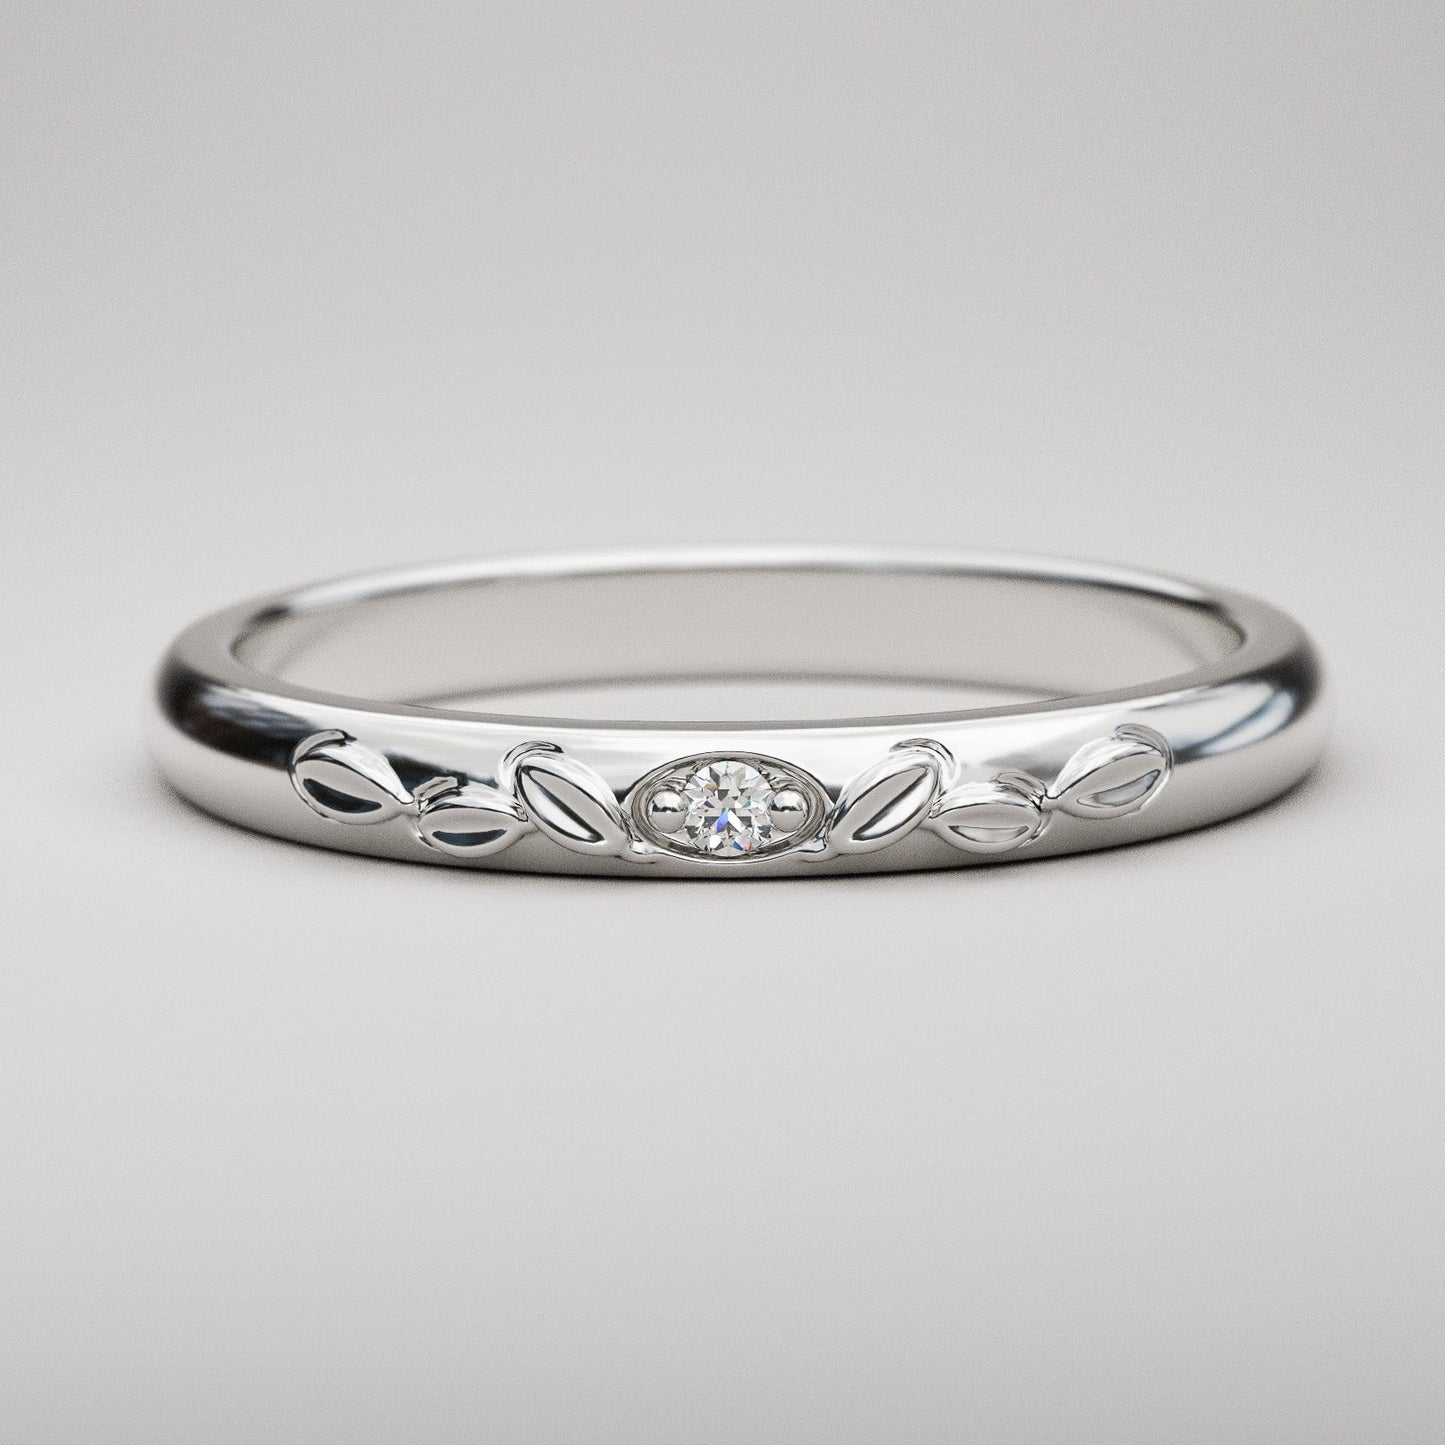 Antique inspired leaves and diamond domed ring in 14k or 18k white gold